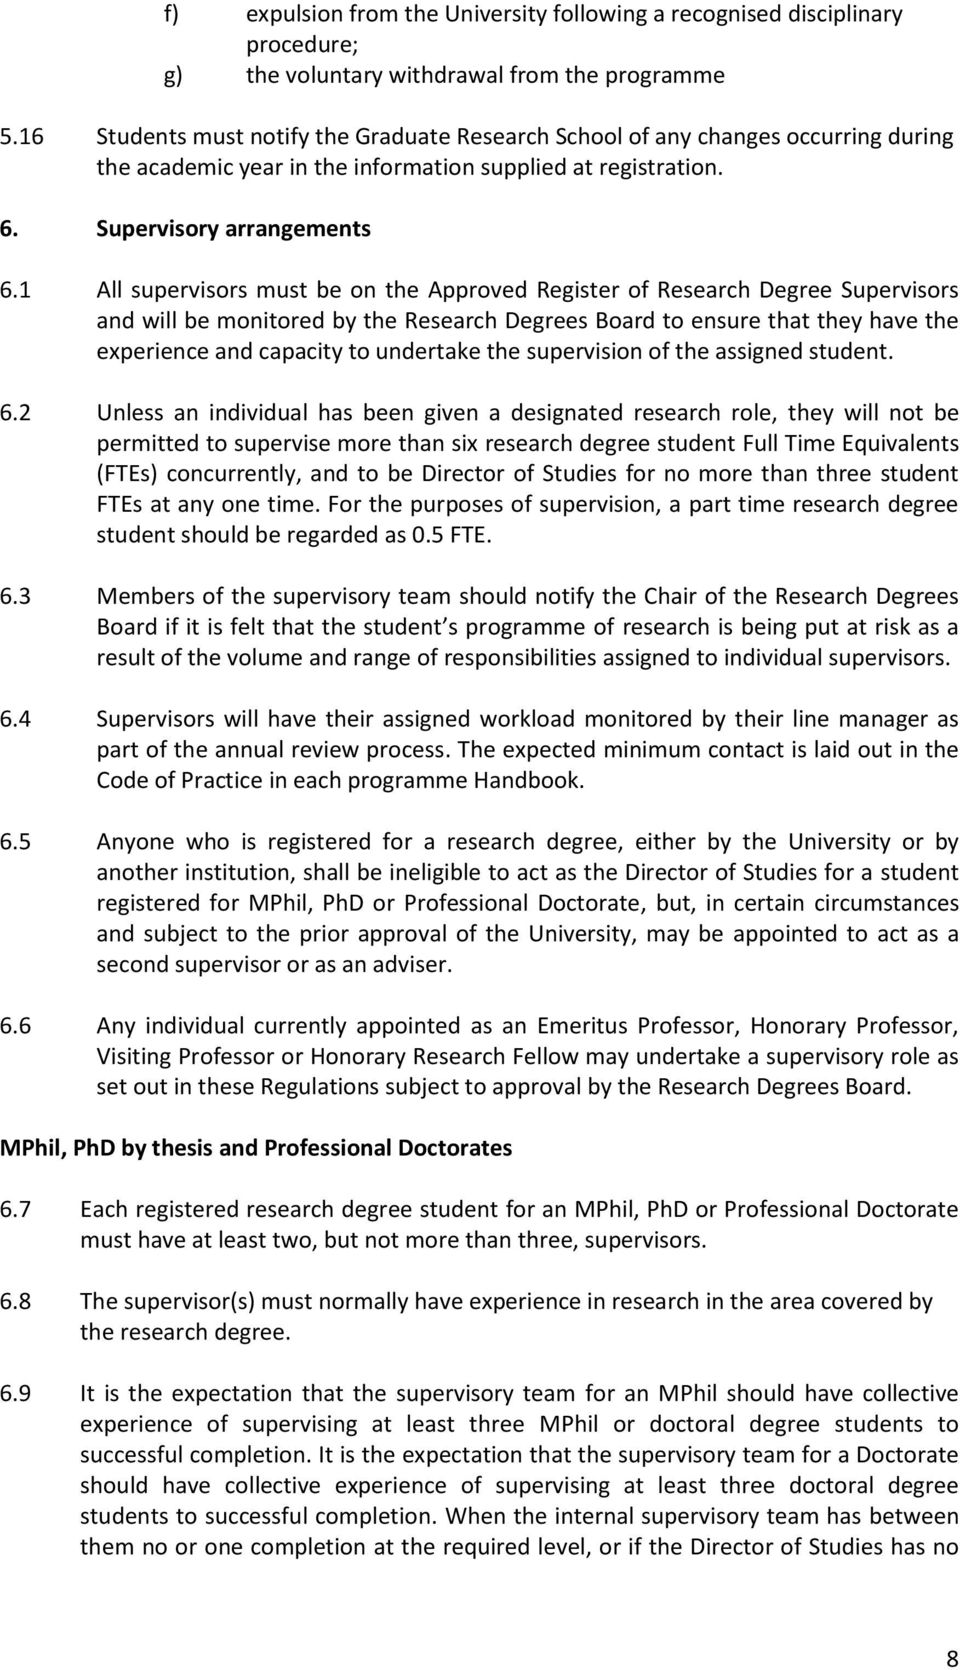 1 All supervisors must be on the Approved Register of Research Degree Supervisors and will be monitored by the Research Degrees Board to ensure that they have the experience and capacity to undertake